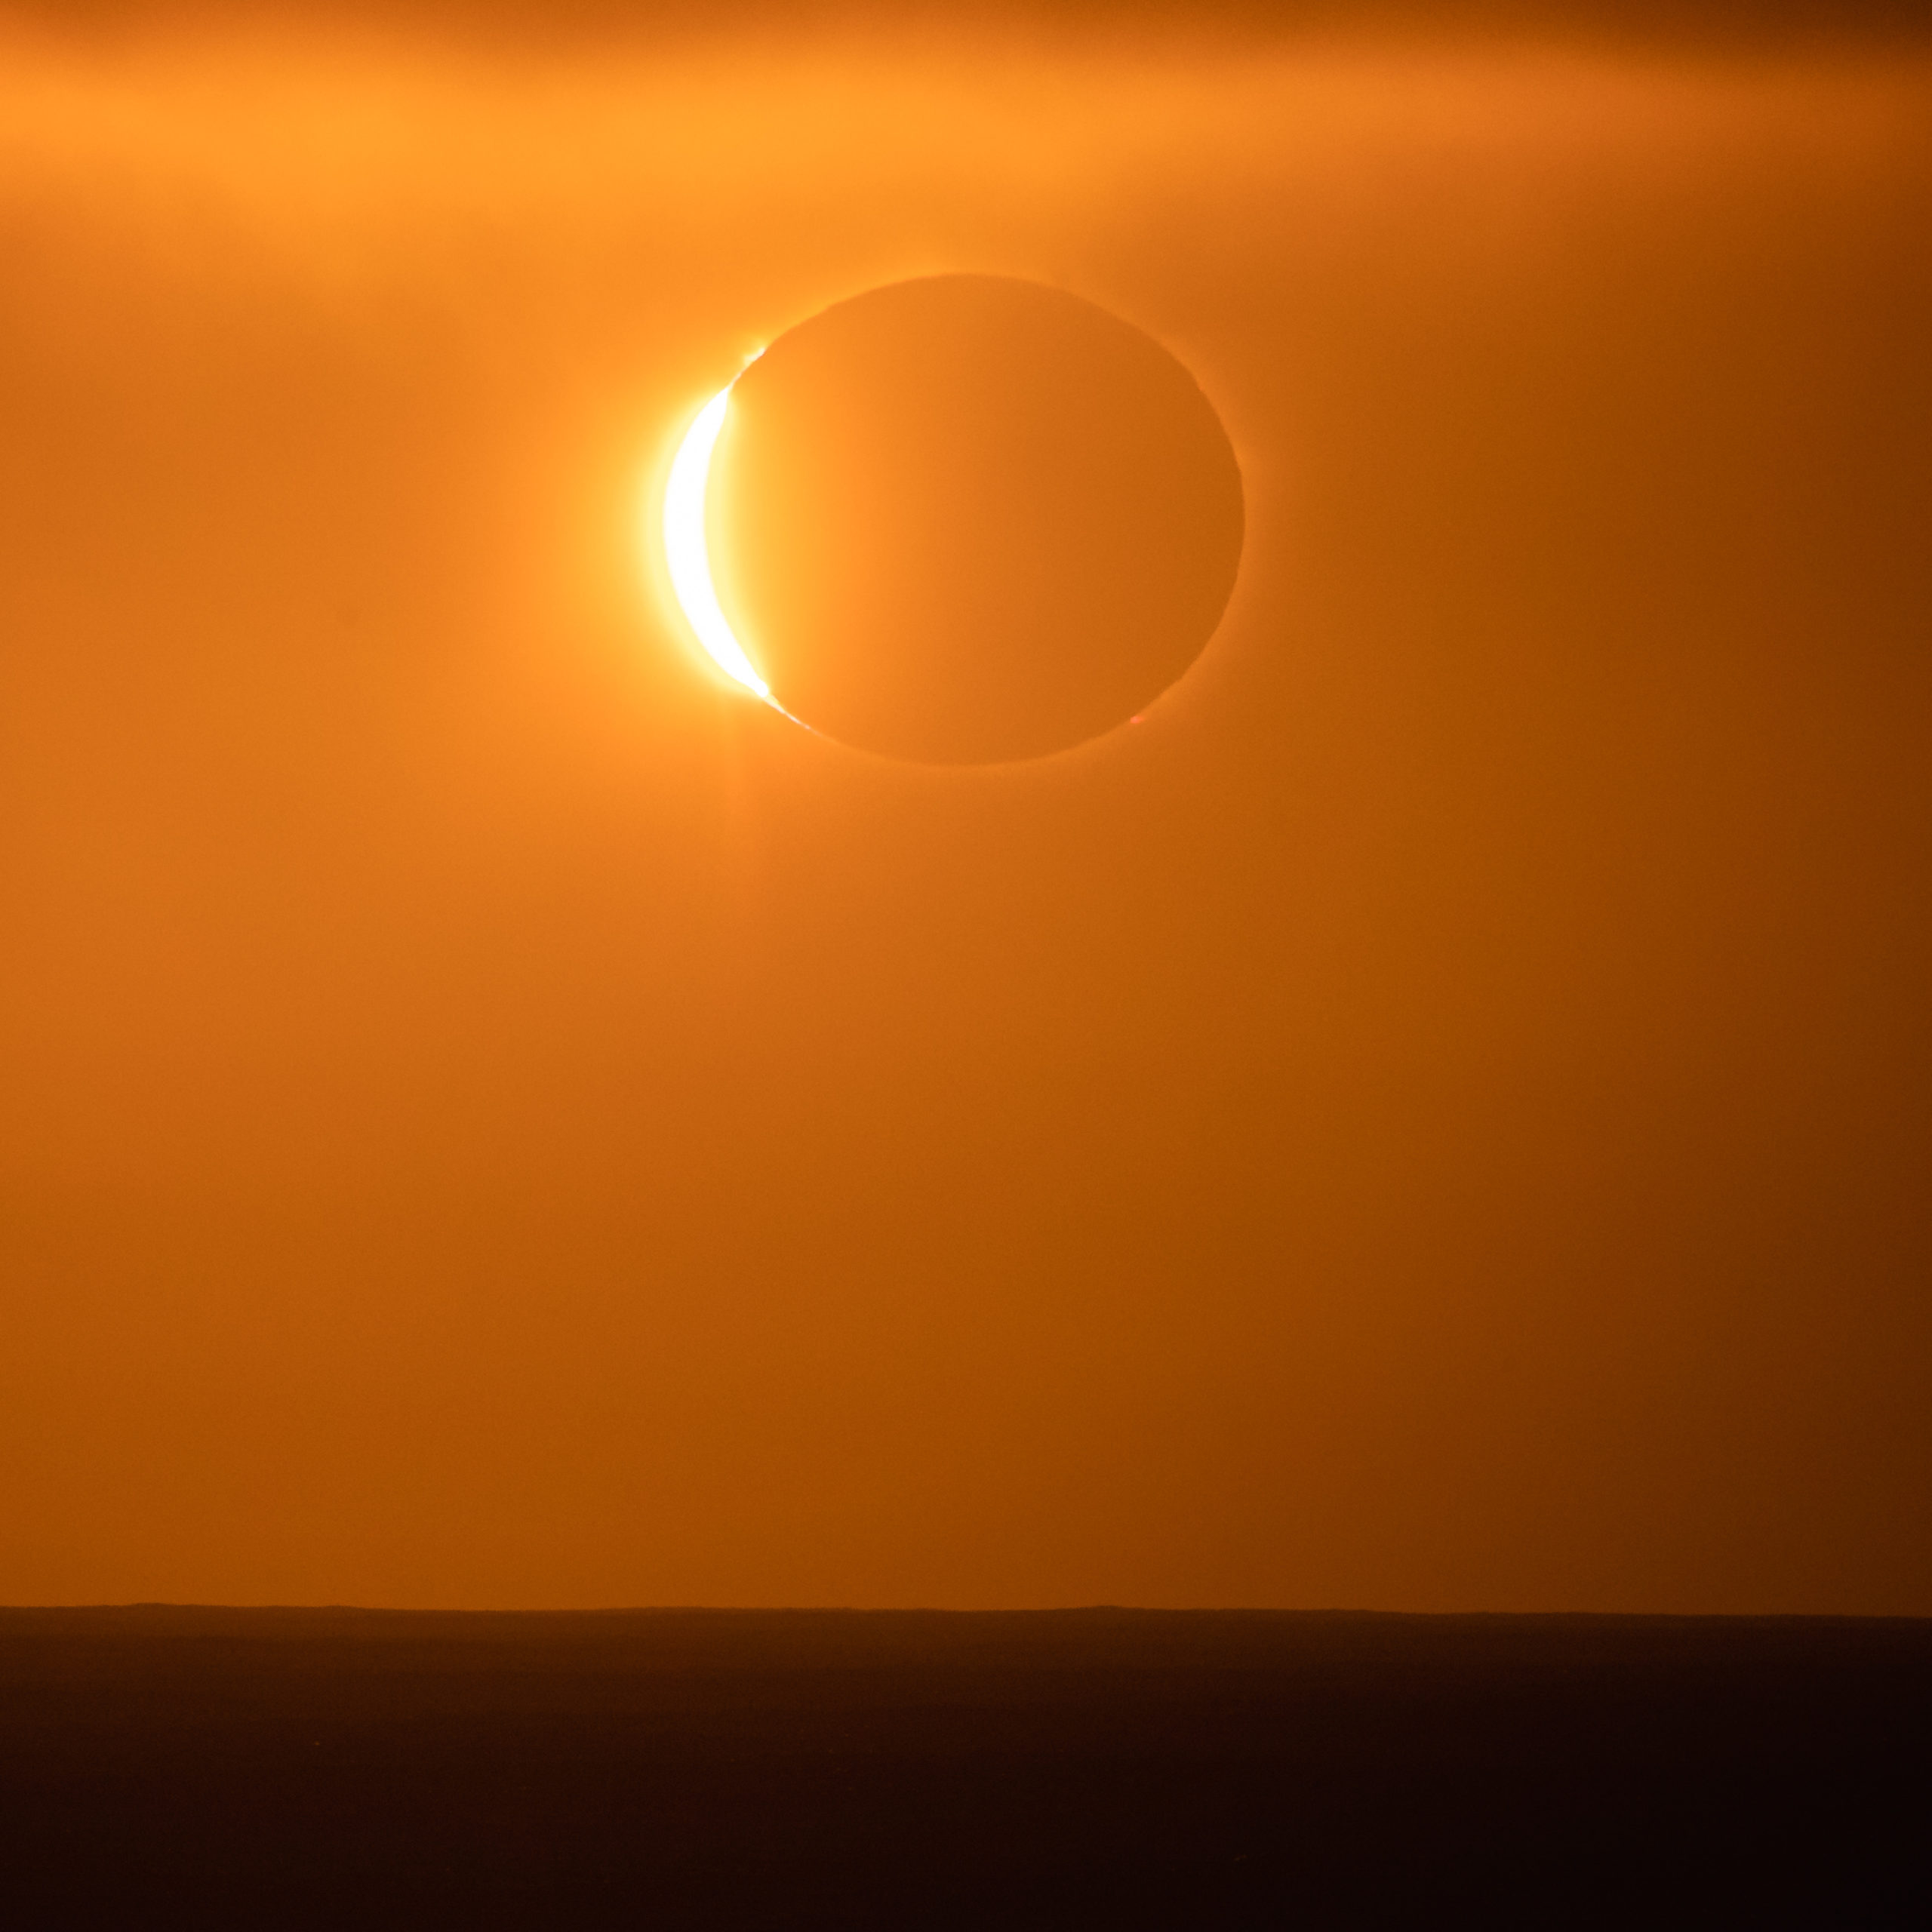 Photography of the total solar eclipse occurring just above the horizon over the ocean during sunrise in Antarctica on December 4 2021